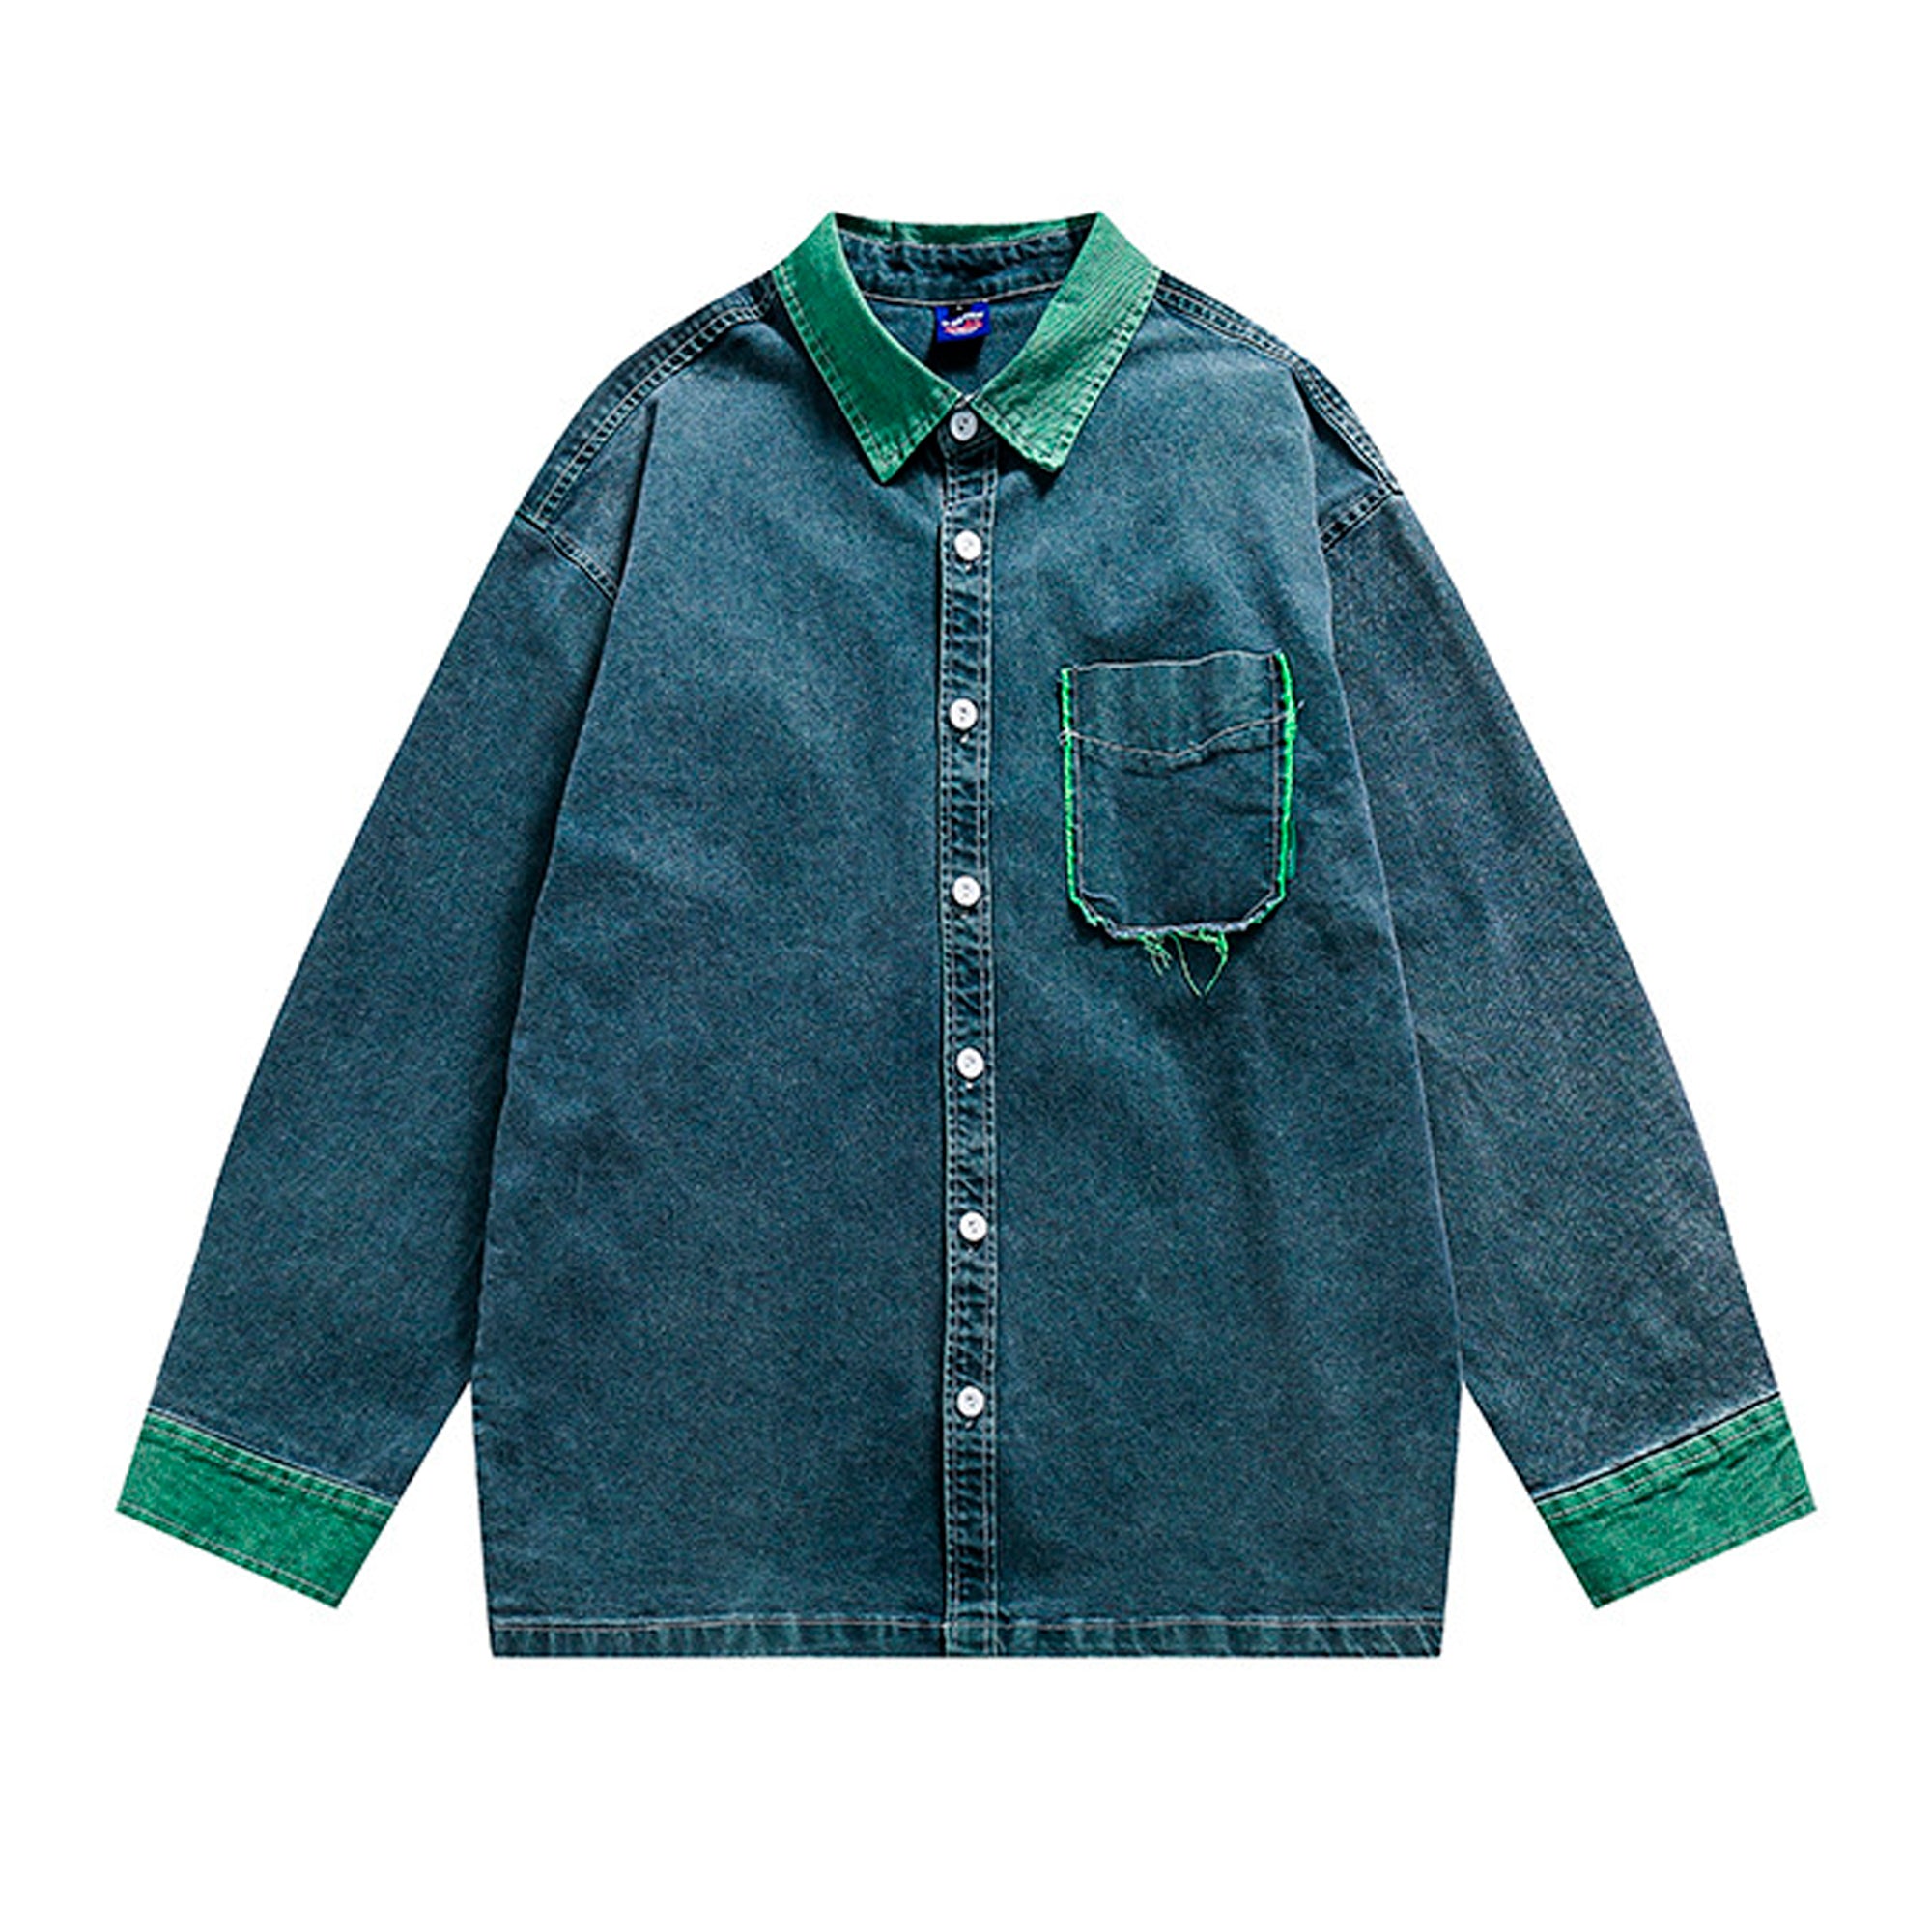 olid color double-sided washed denim shirt